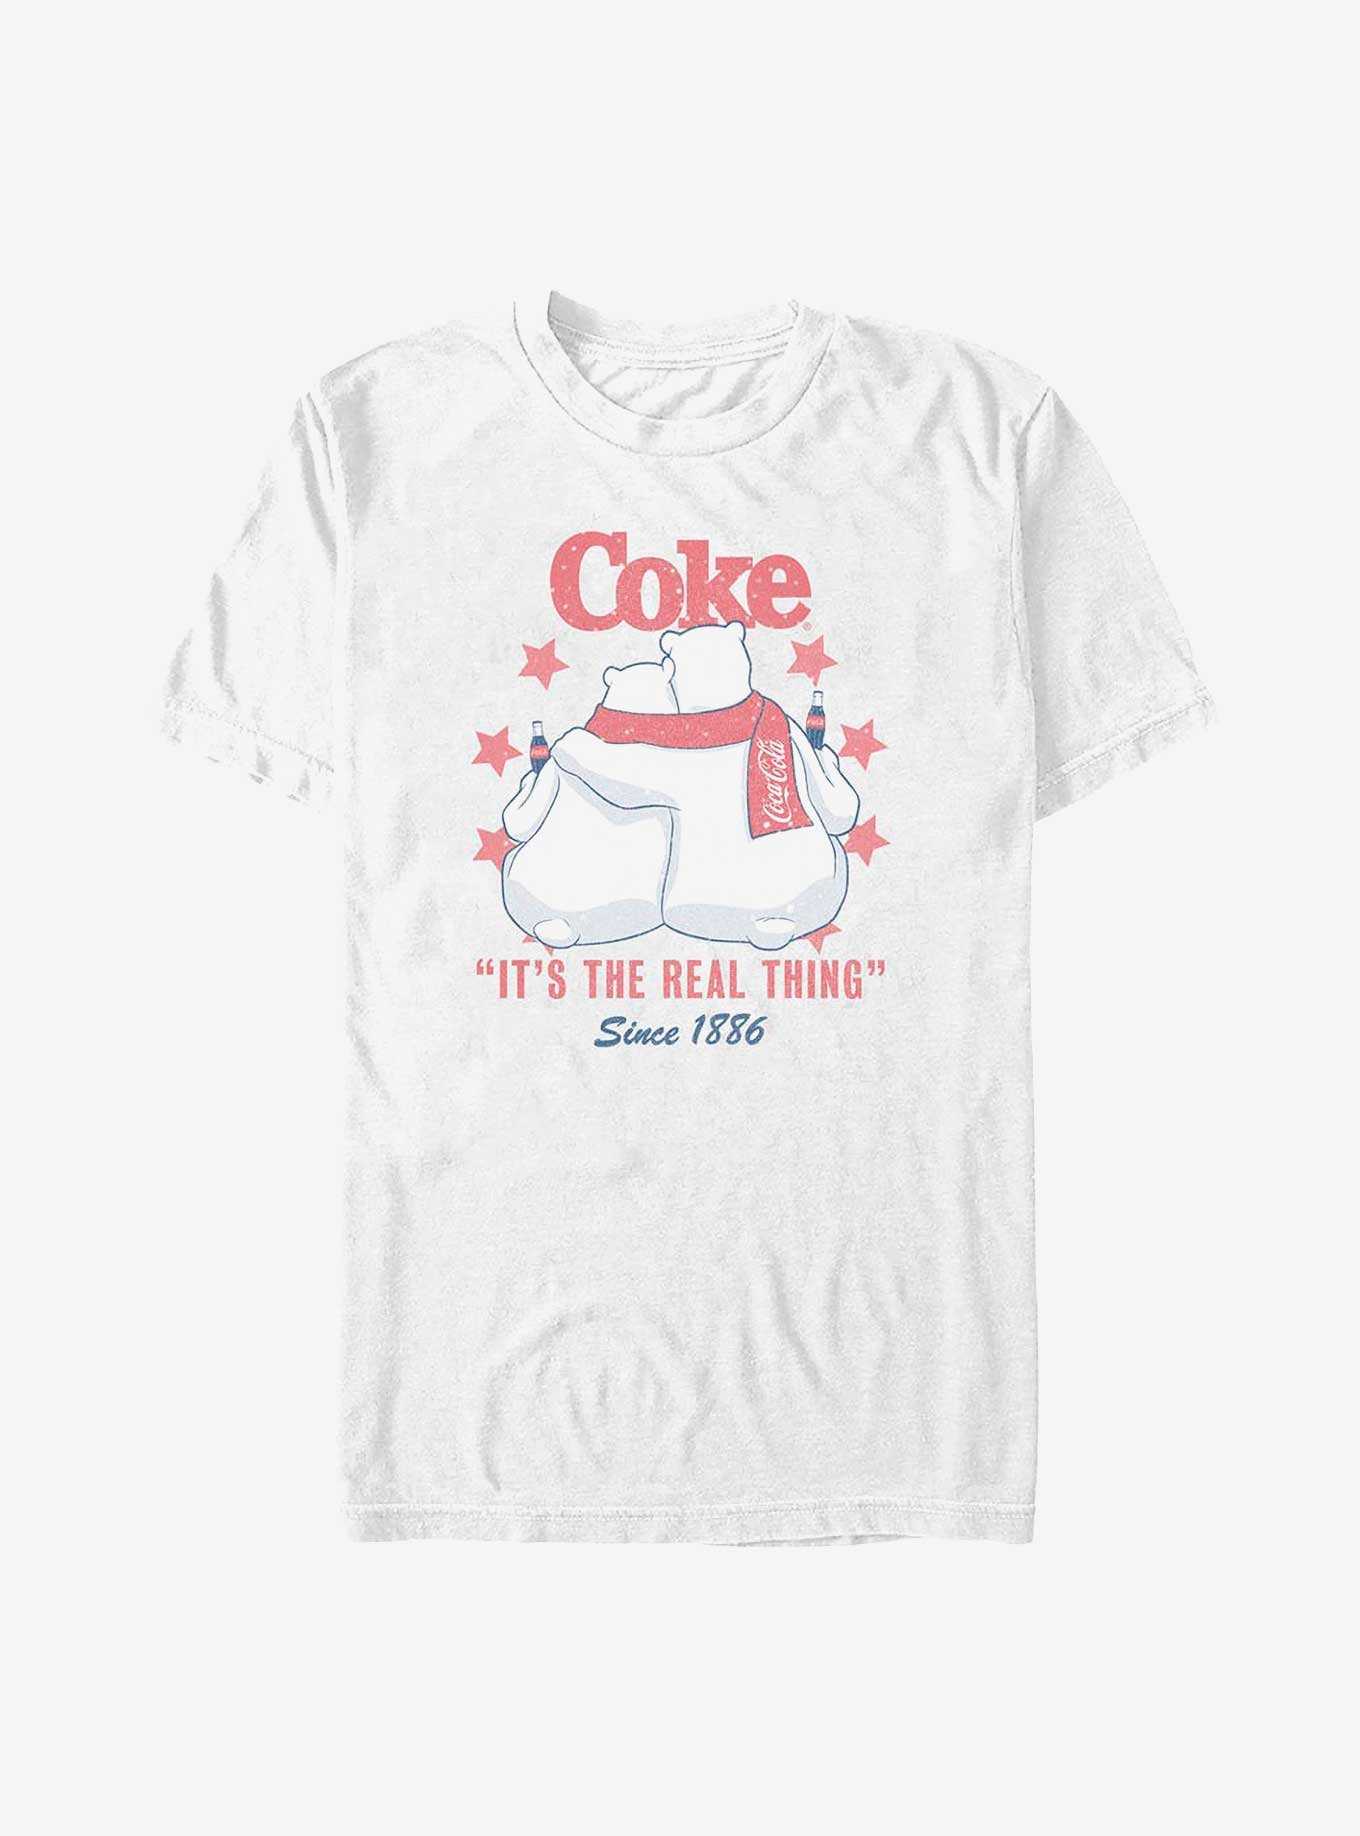 Coca-Cola Polar Bears The Real Thing Since 1886 T-Shirt, , hi-res